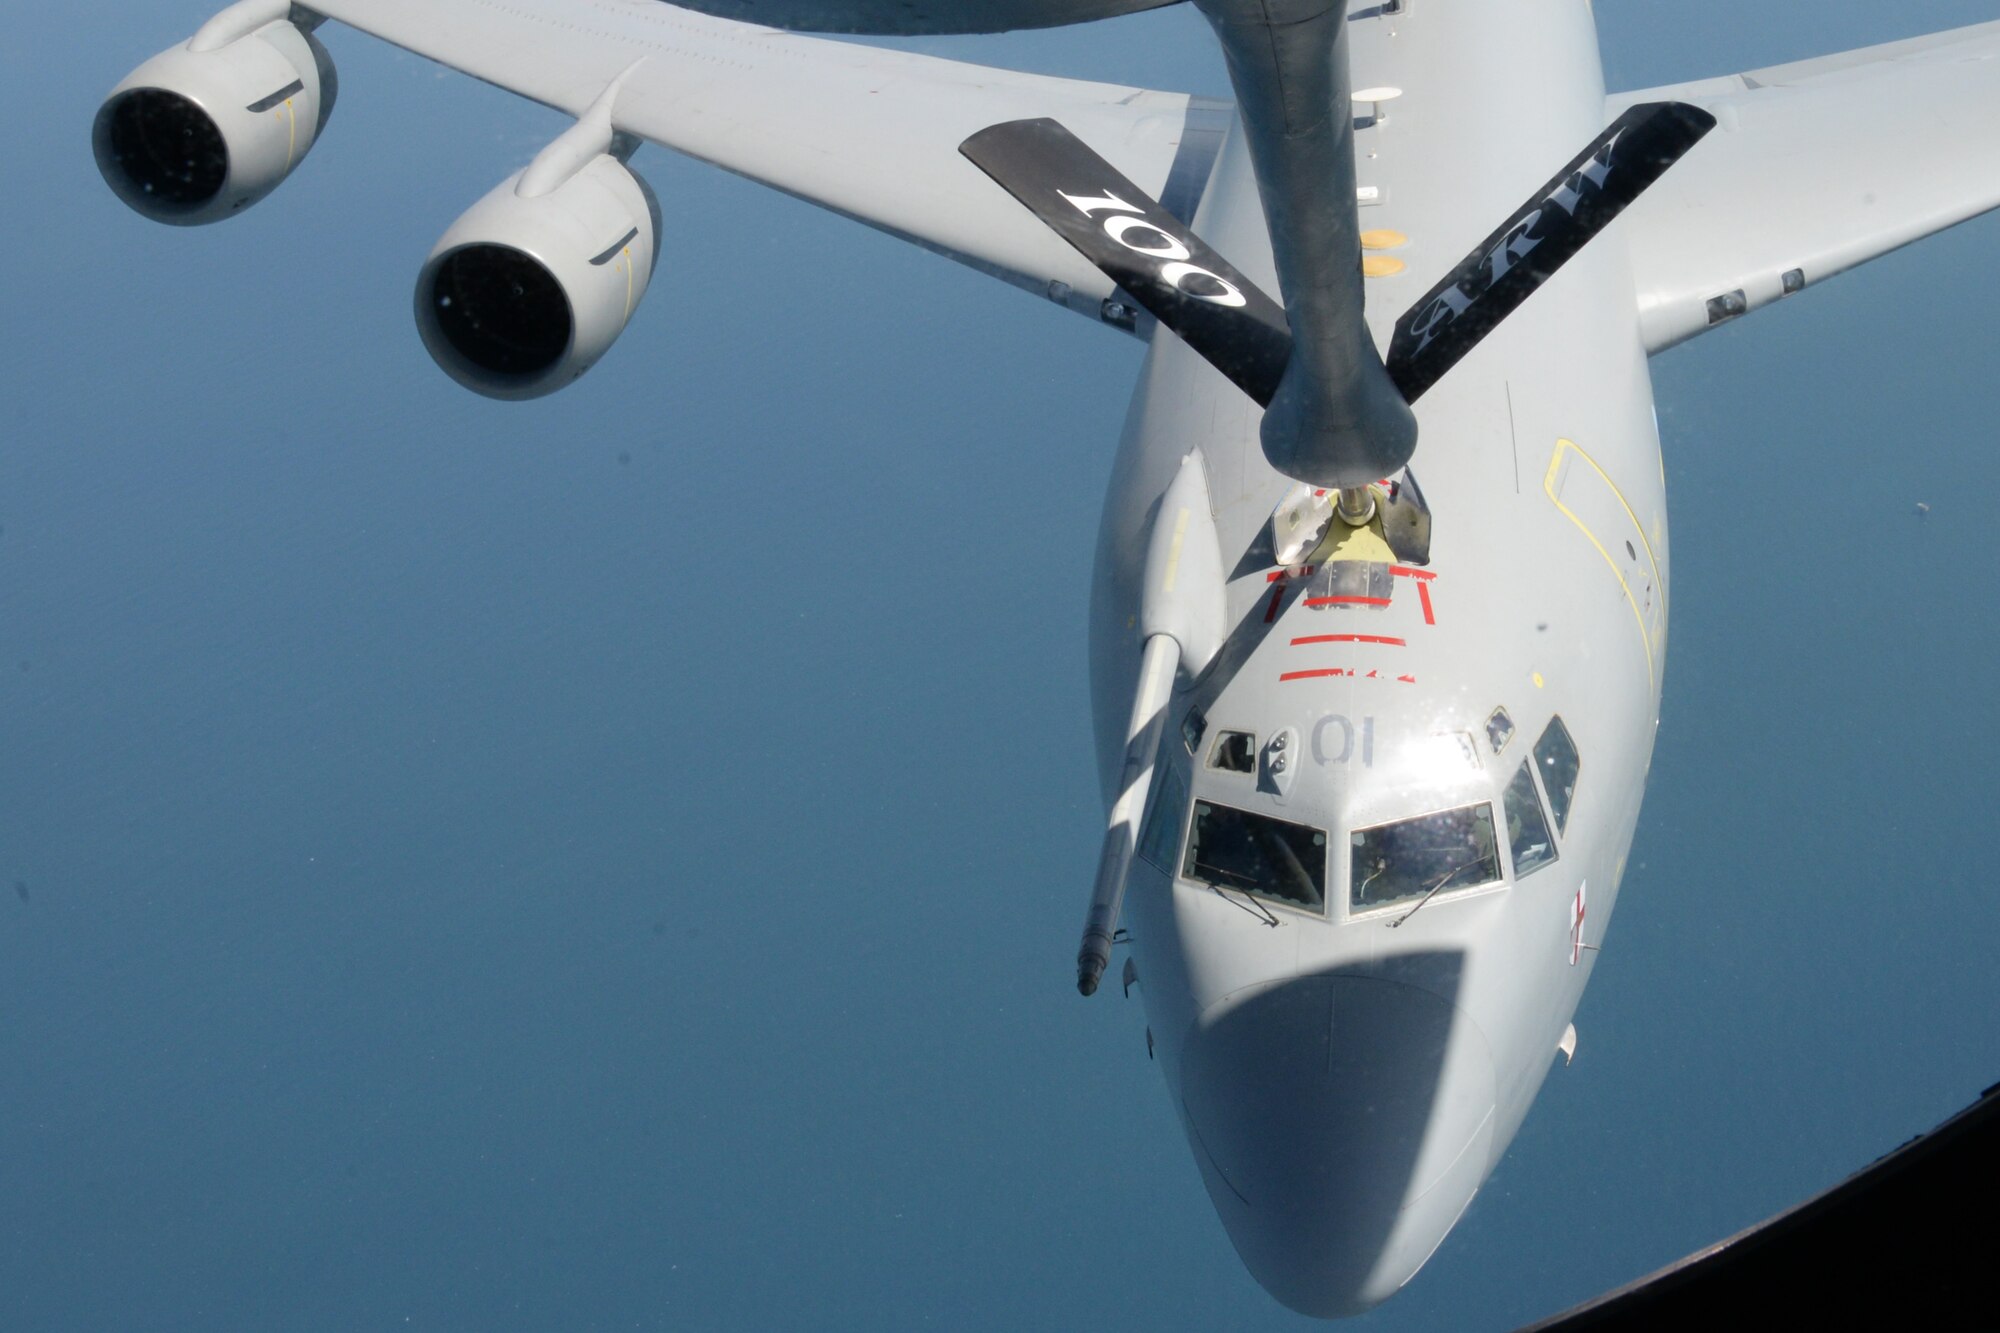 A U.S. Air Force KC-135 Stratotanker refuels a Royal Air Force E-3D over the North Sea May 17, 2018. The KC-135 participated in a training flight over the North Sea as part of the 5th annual European Tanker Symposium. (U.S. Air Force photo by Tech. Sgt. David Dobrydney)